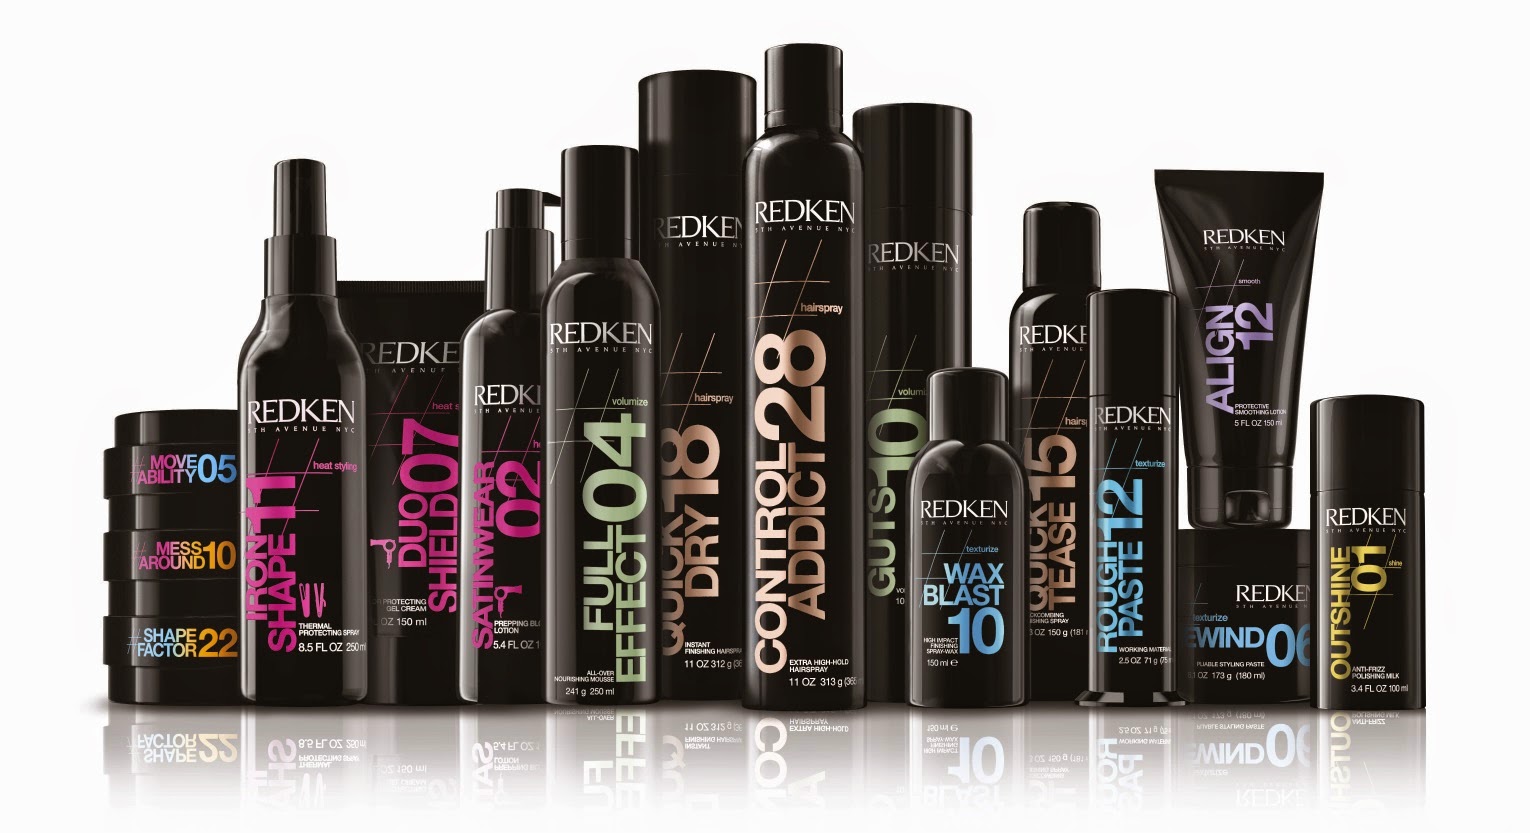 Crystal's Reviews: Redken styling restyled